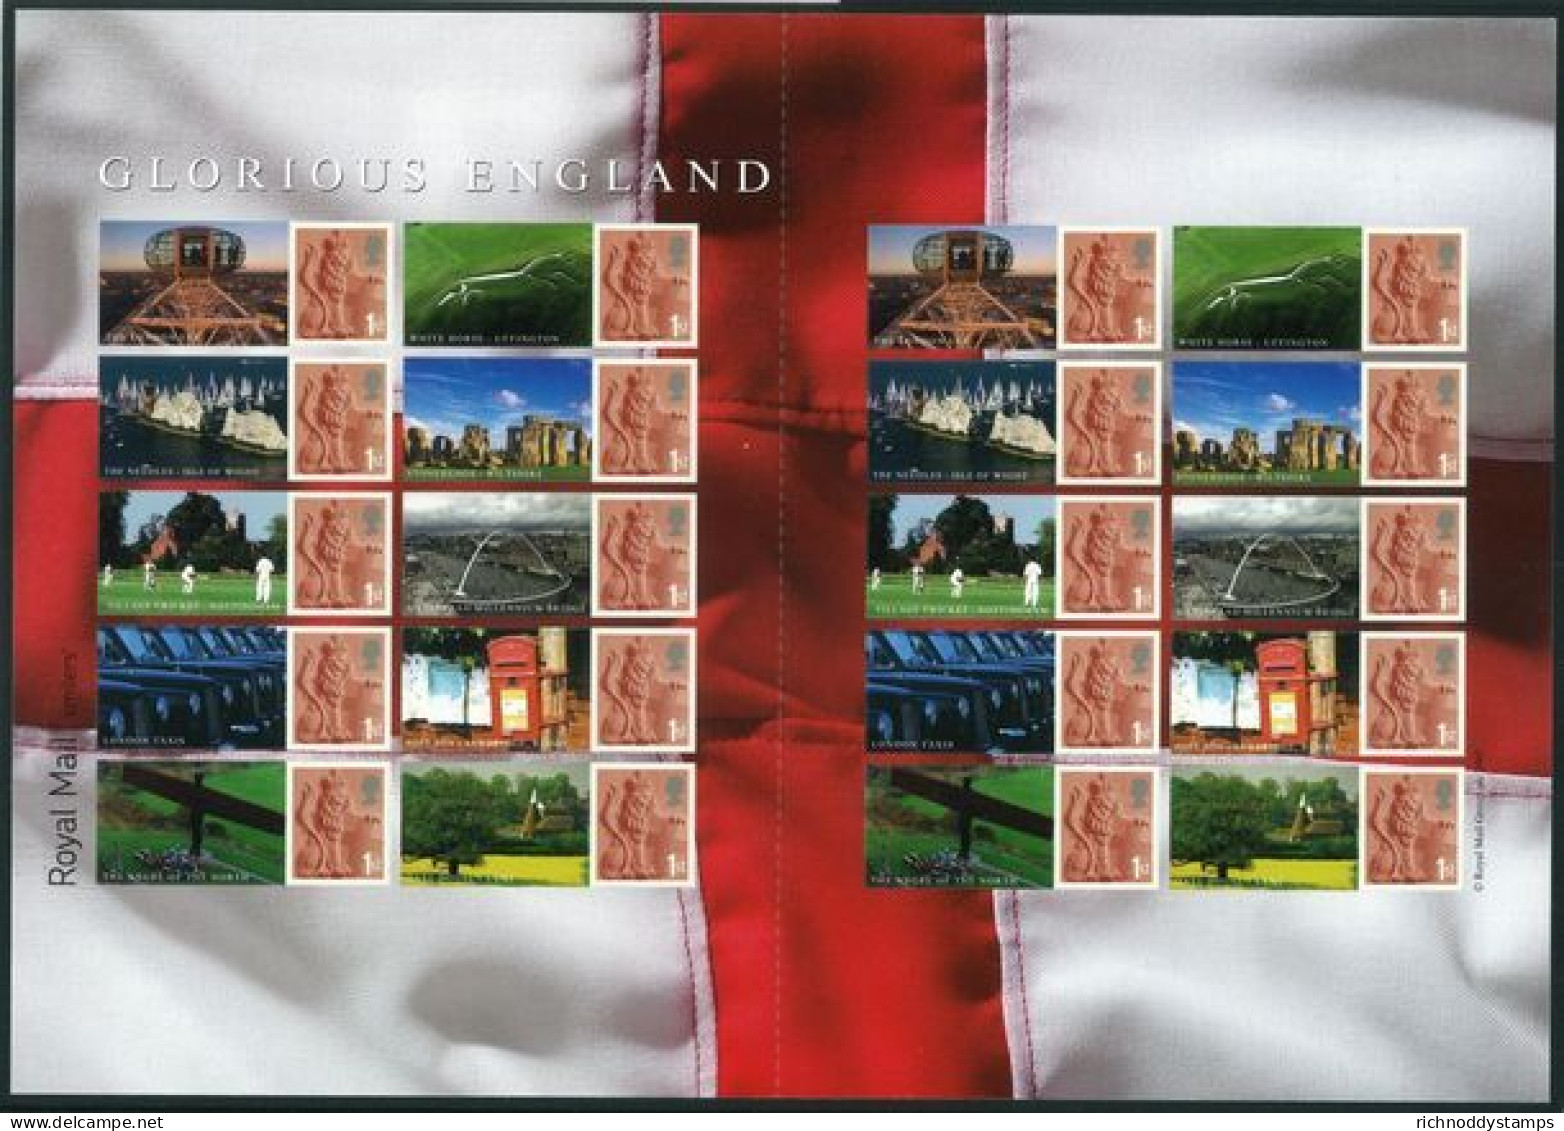 2007 Glorious England Smilers Sheet Unmounted Mint.  - Smilers Sheets